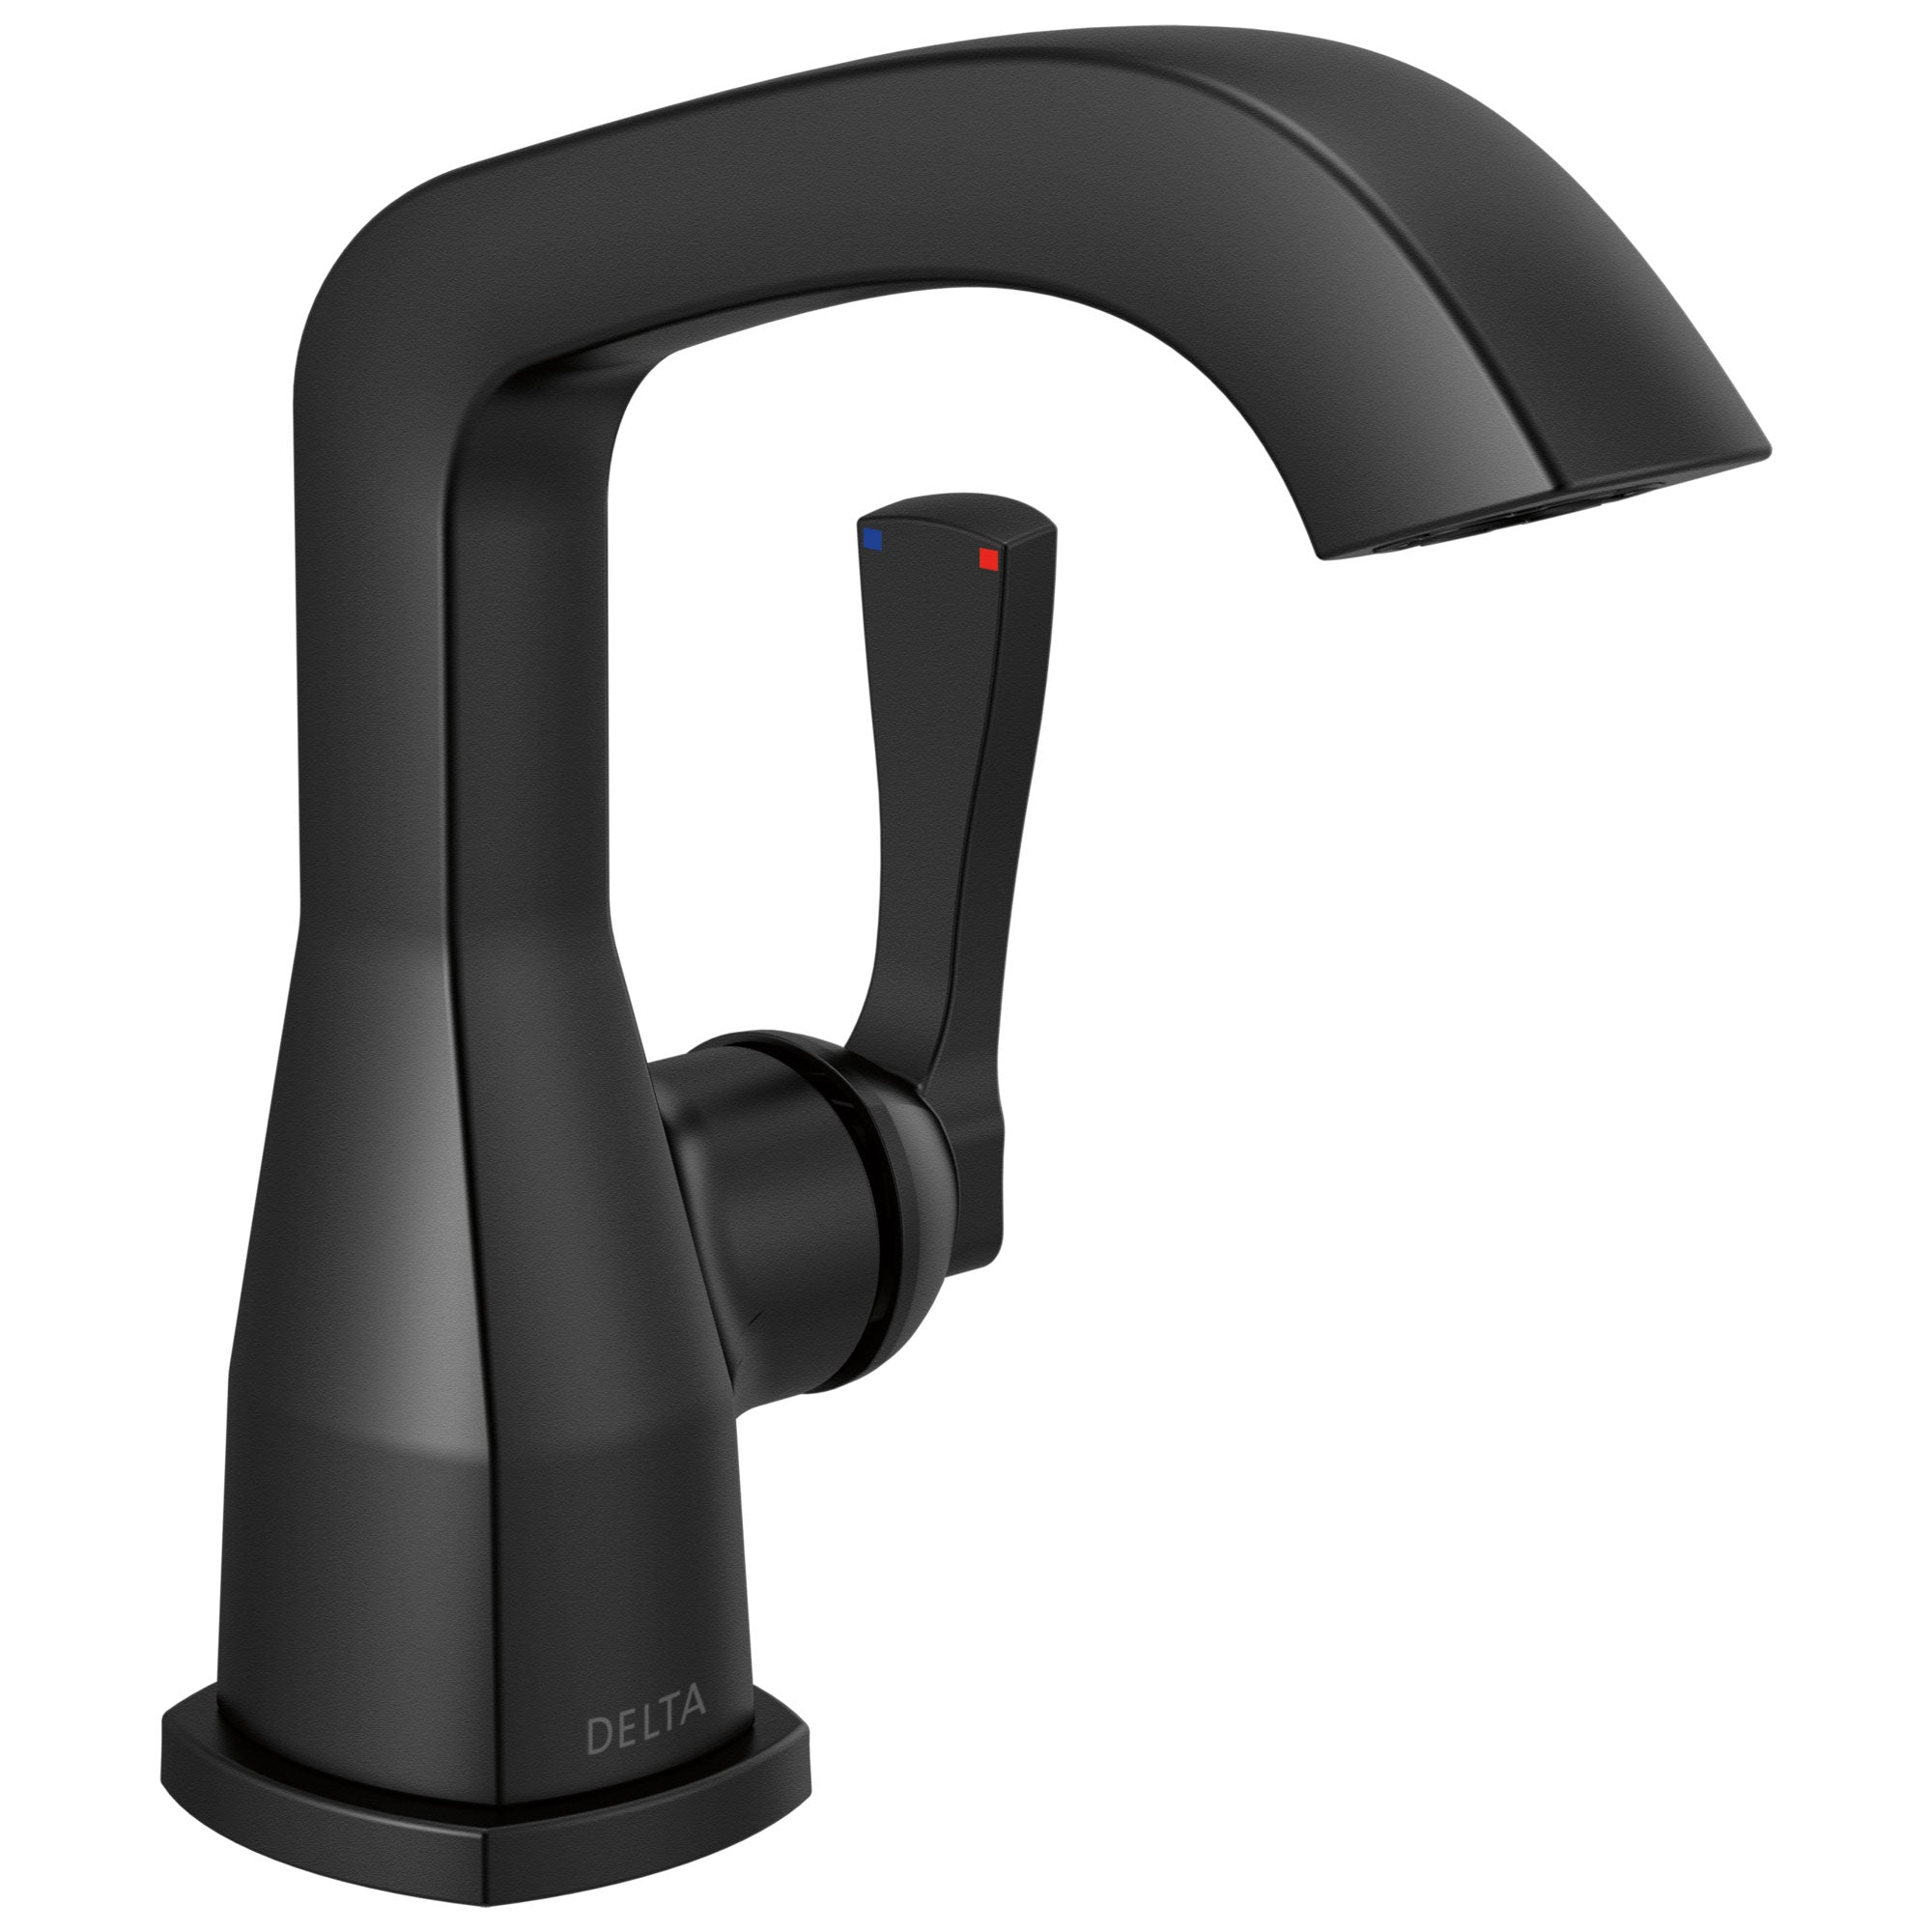 Delta Stryke Matte Black Finish Single Hole Bathroom Sink Faucet Includes Lever Handle and Matching Drain D3603V